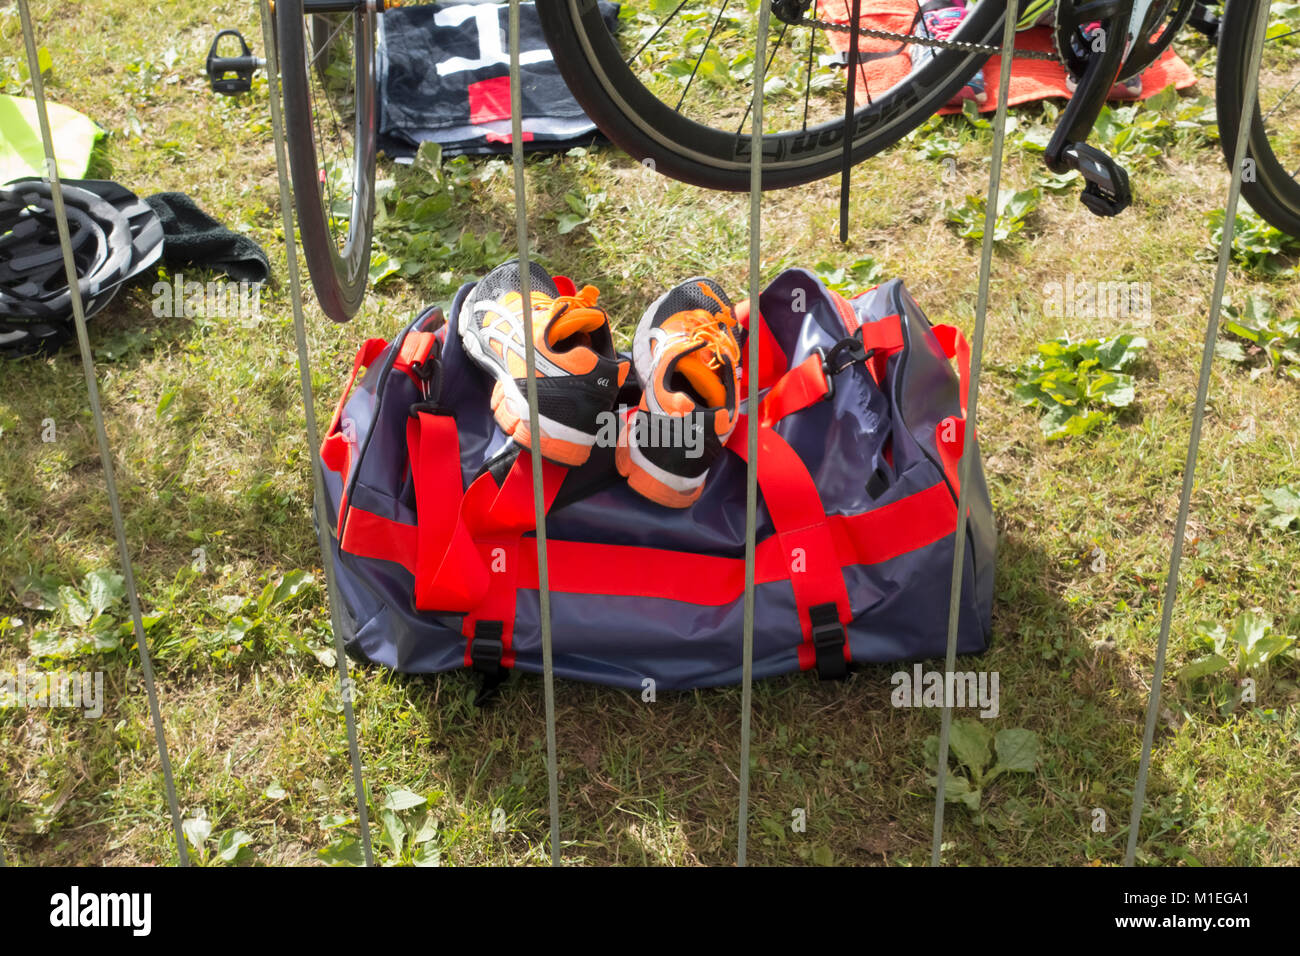 Bike and sports bag in the transition area of a triathlon Stock Photo